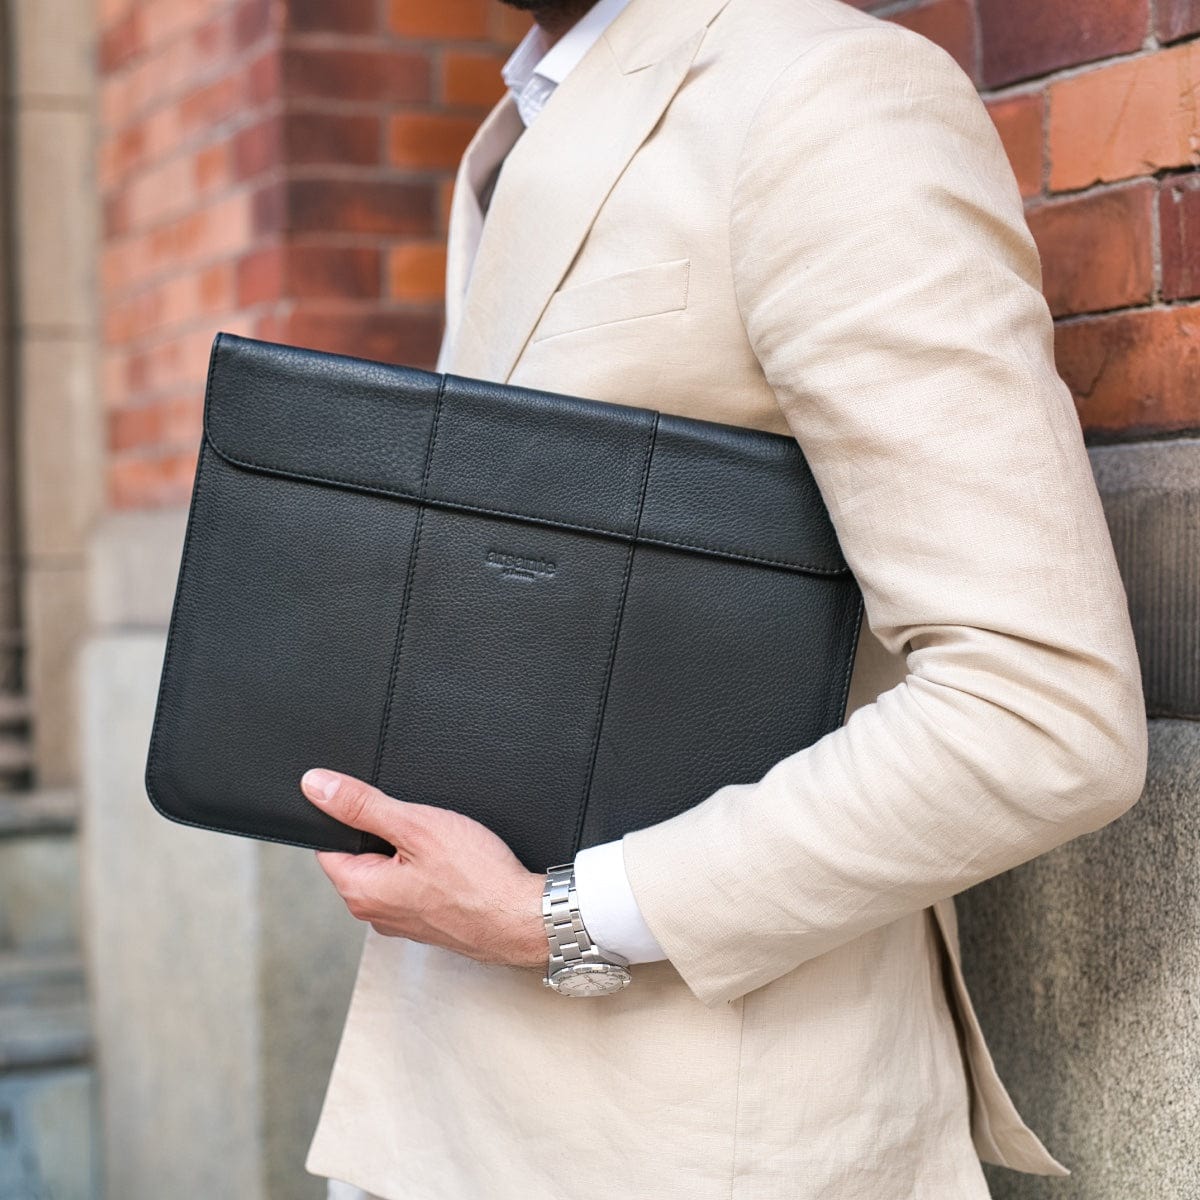 A close-up of the Arsante Laptop Sleeve with a secure magnetic closure.